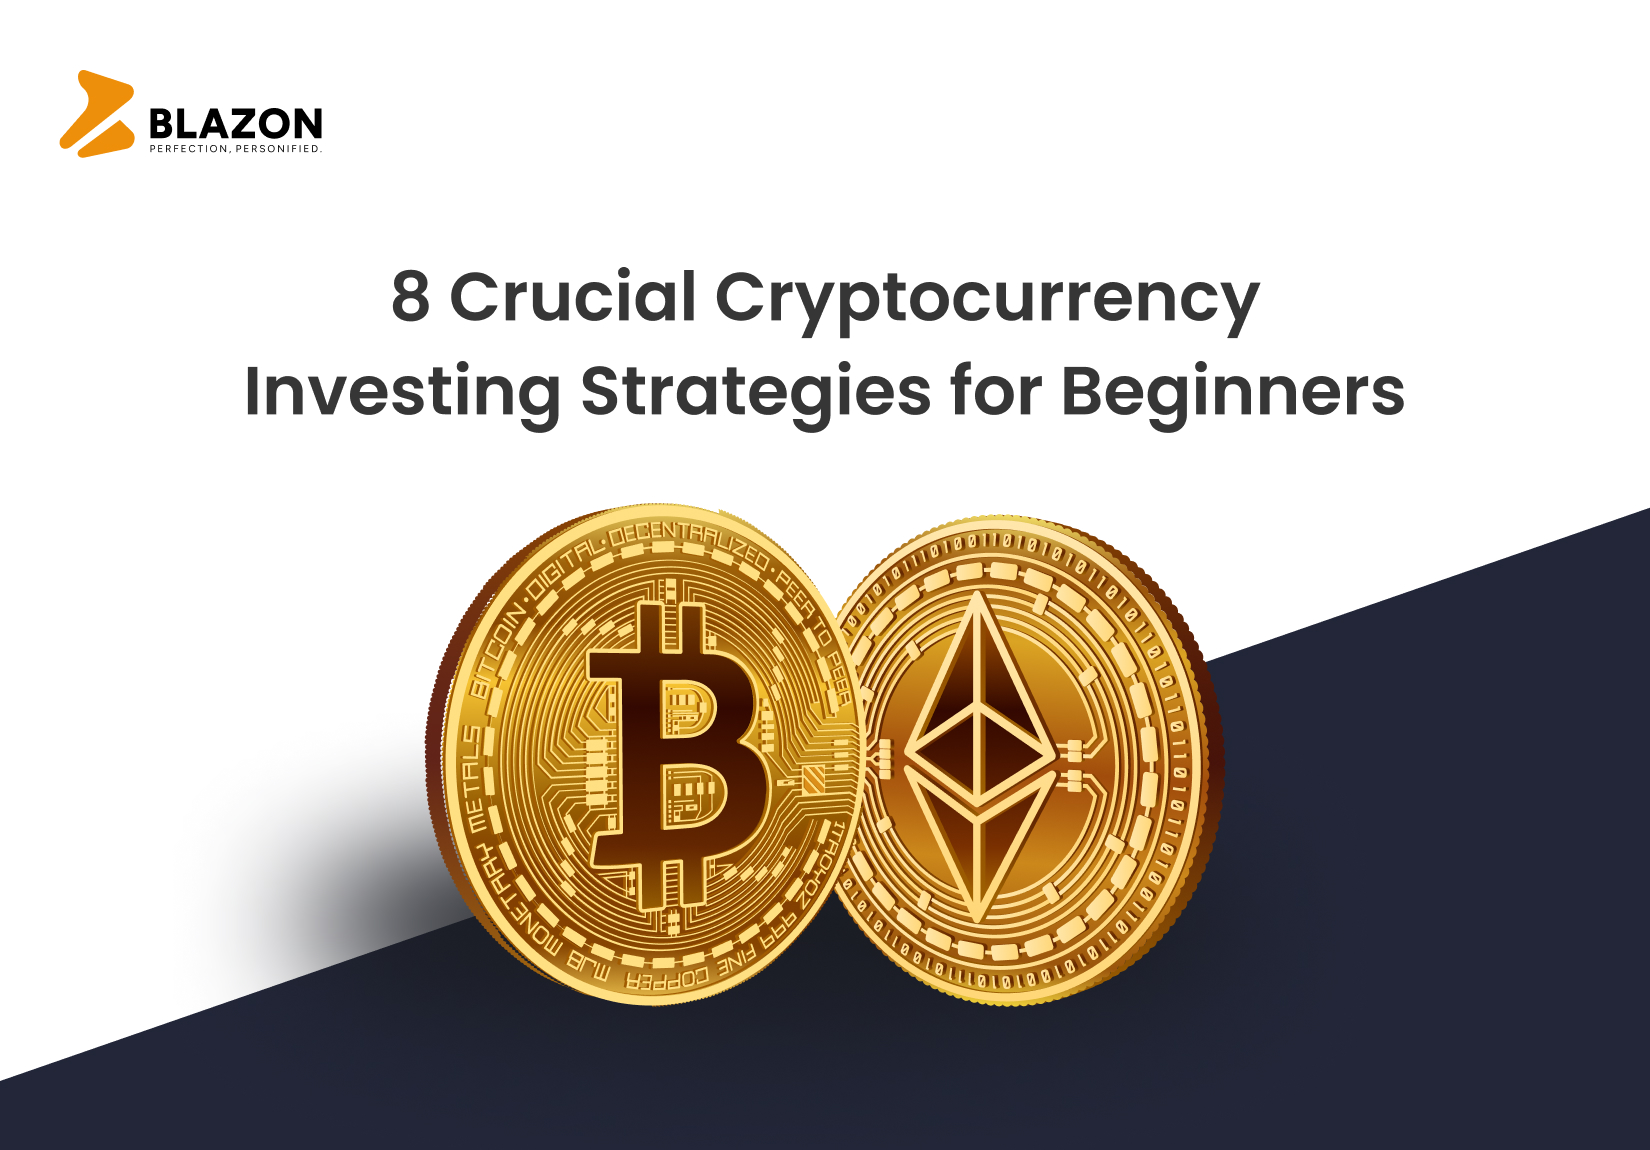 8 Crucial Cryptocurrency Investing Strategies for Beginners